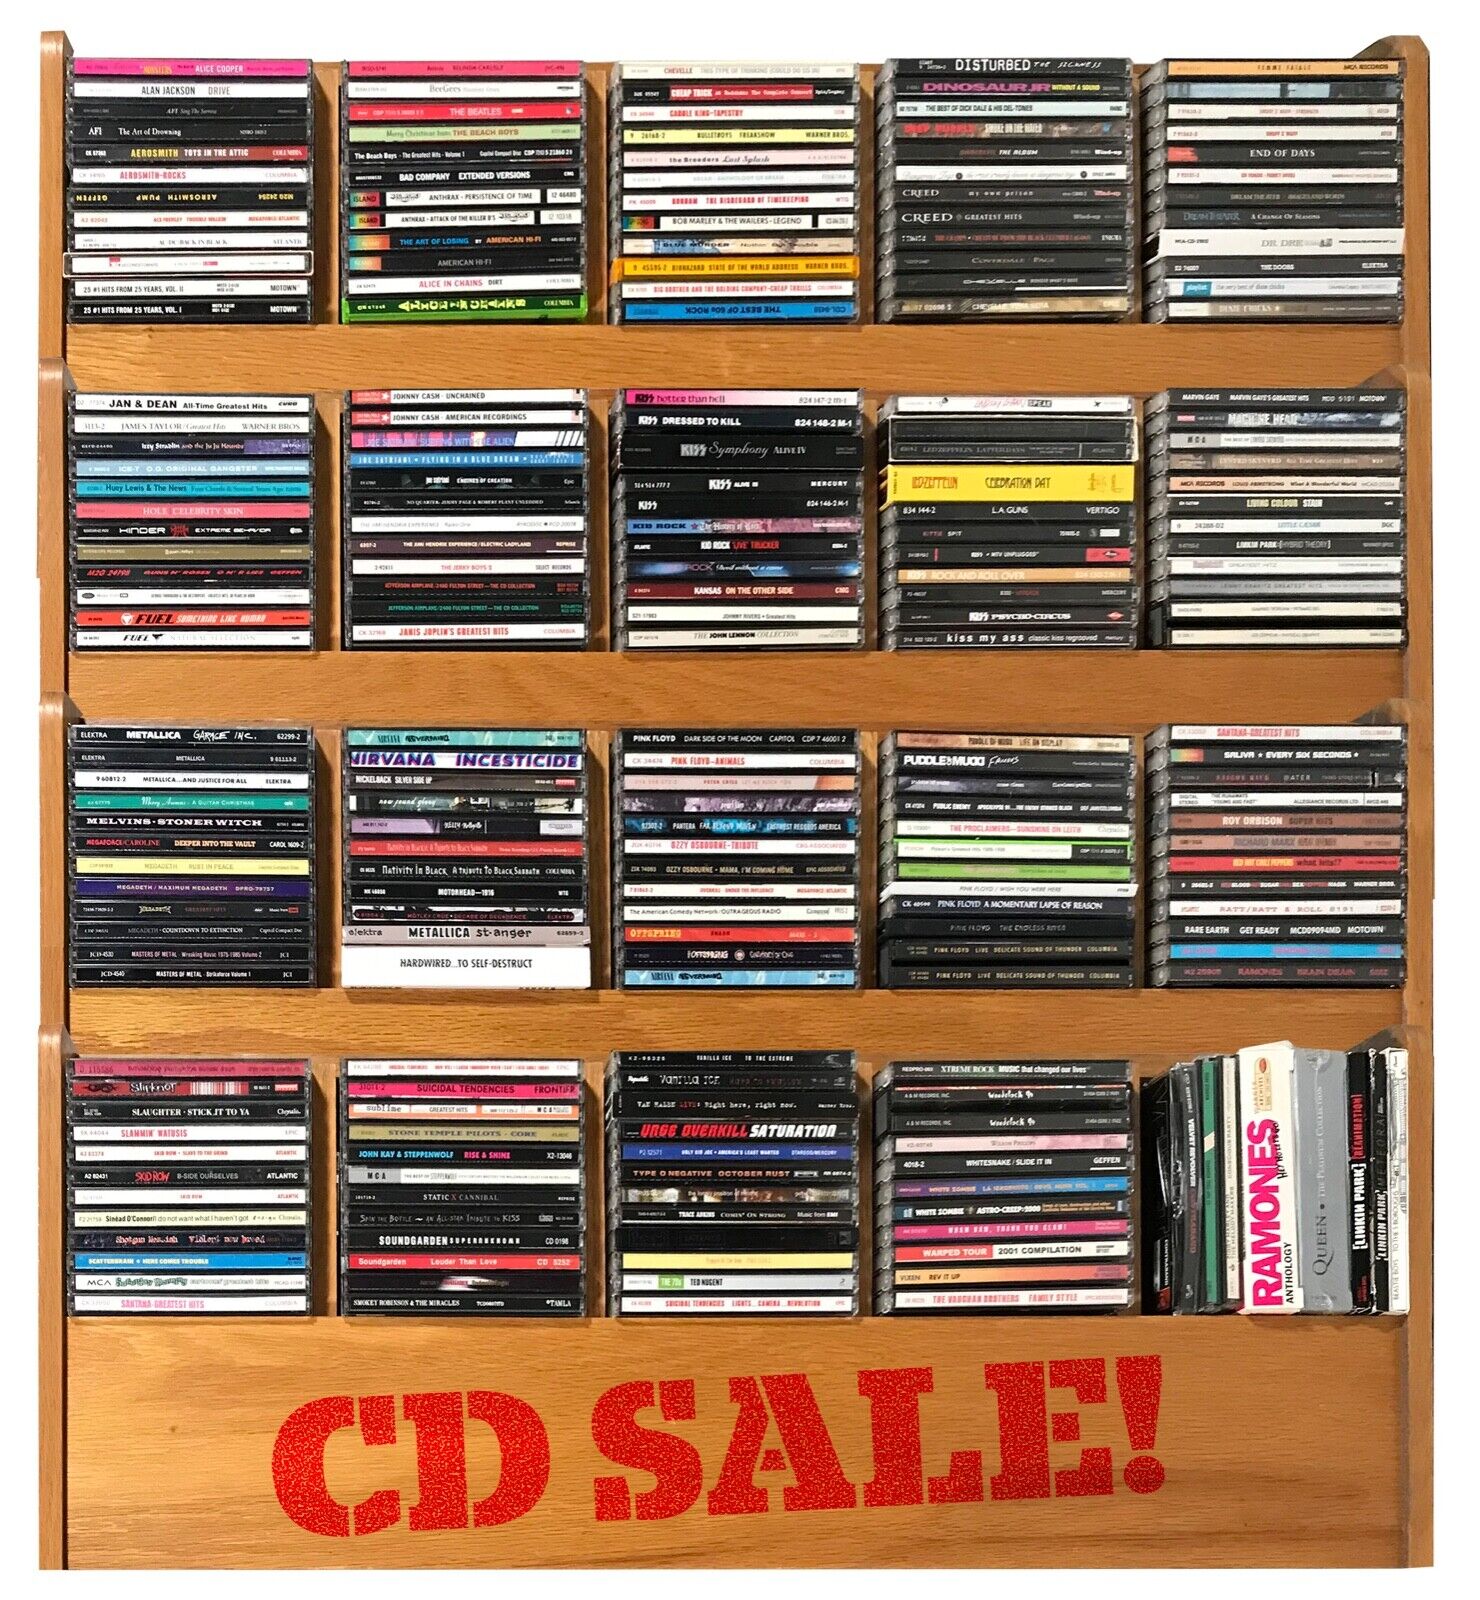 Dave's Build Your Own CD Bundle Sale - Your Choice $3.95 & Up - Buy More & Save!